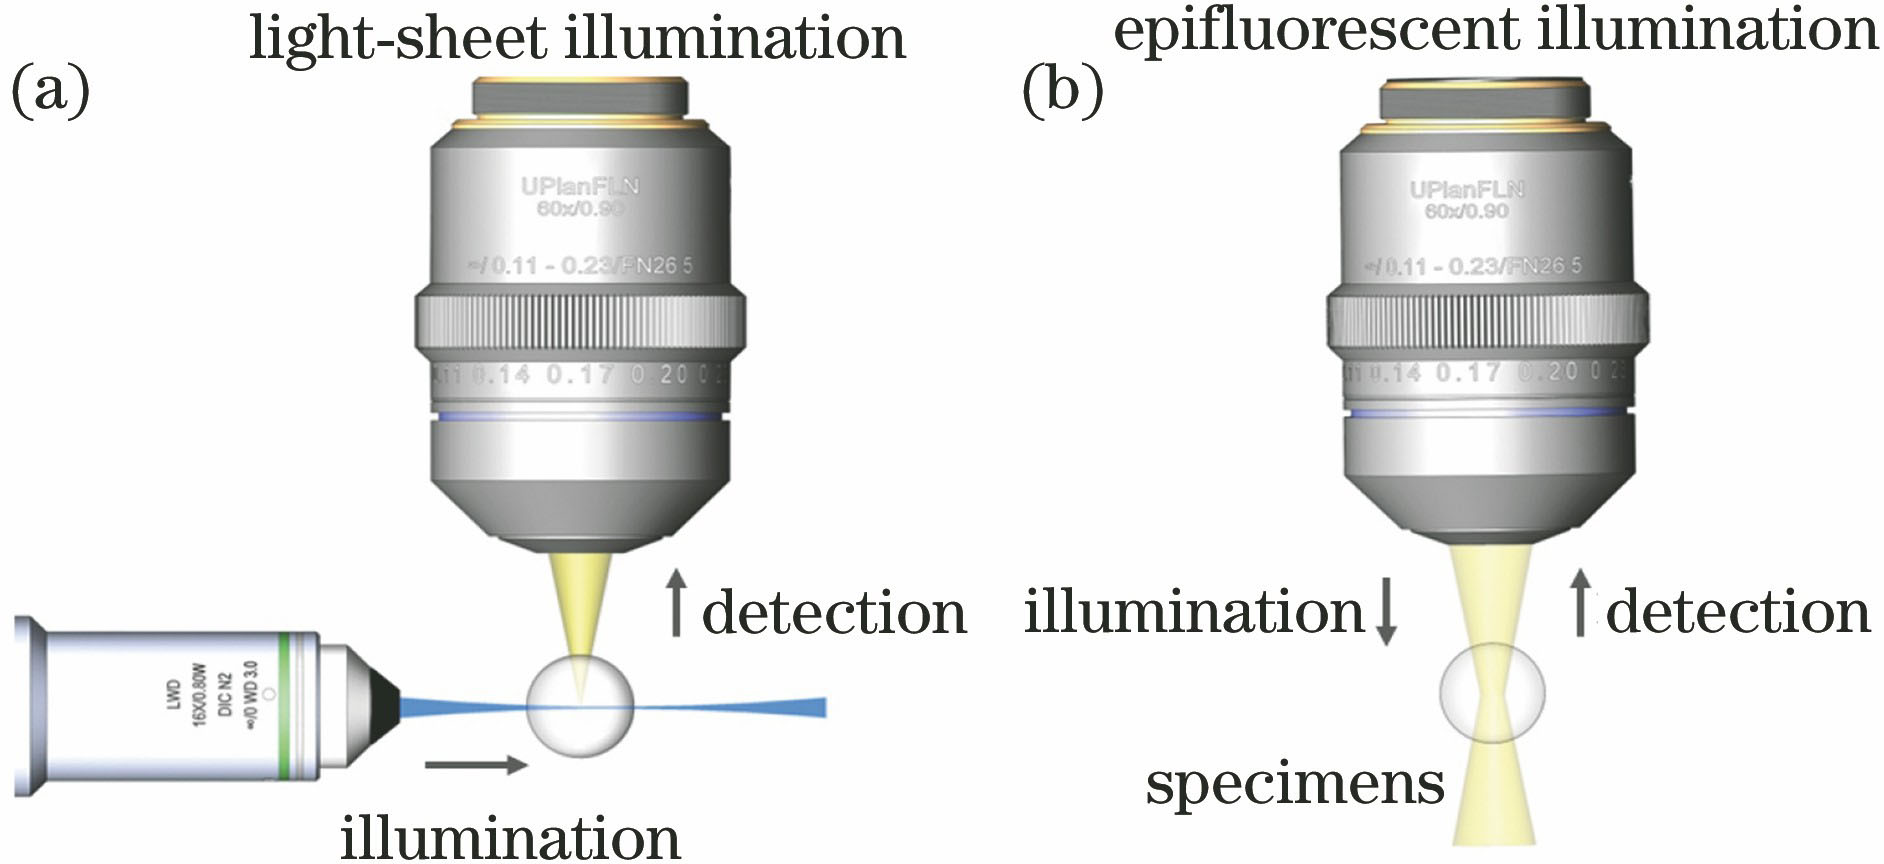 Comparison of two types of illumination and imaging schemes. (a) LSFM illuminates the sample from the side with a thin light-sheet and captures the optical sectioned image in orthogonal direction by another detection objective; (b) epifluorescence microscopy uses the same objective to illuminate and detect the sample, in which both the in-focus and out-of-focus portions are excited